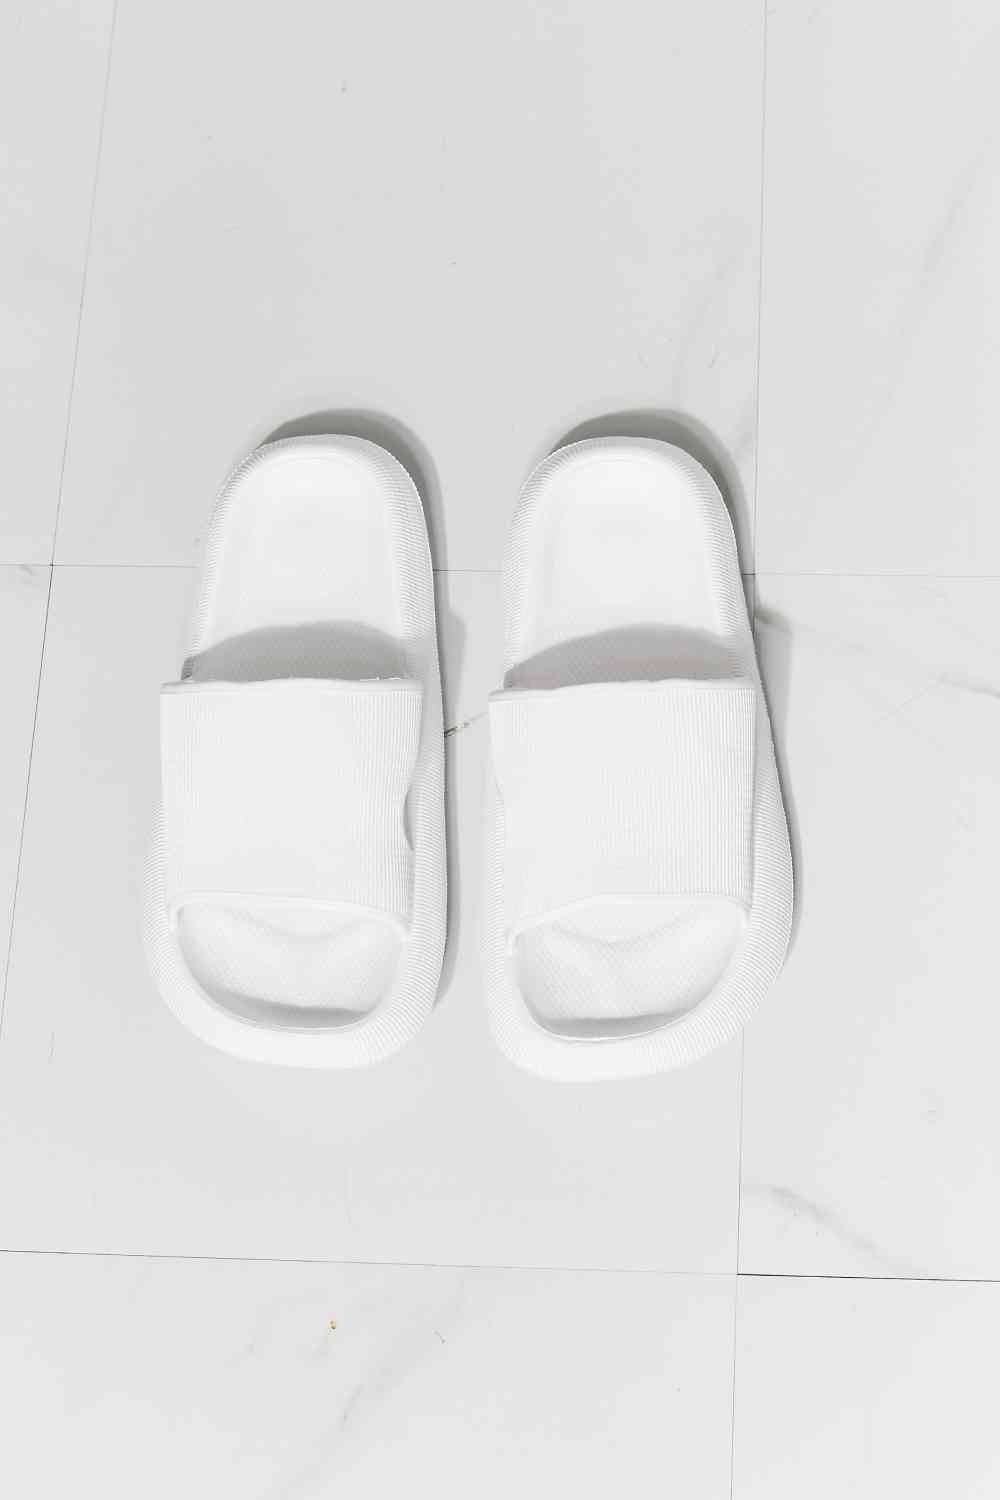 MMShoes Arms Around Me Open Toe Slide in White - Rose Gold Co. Shop